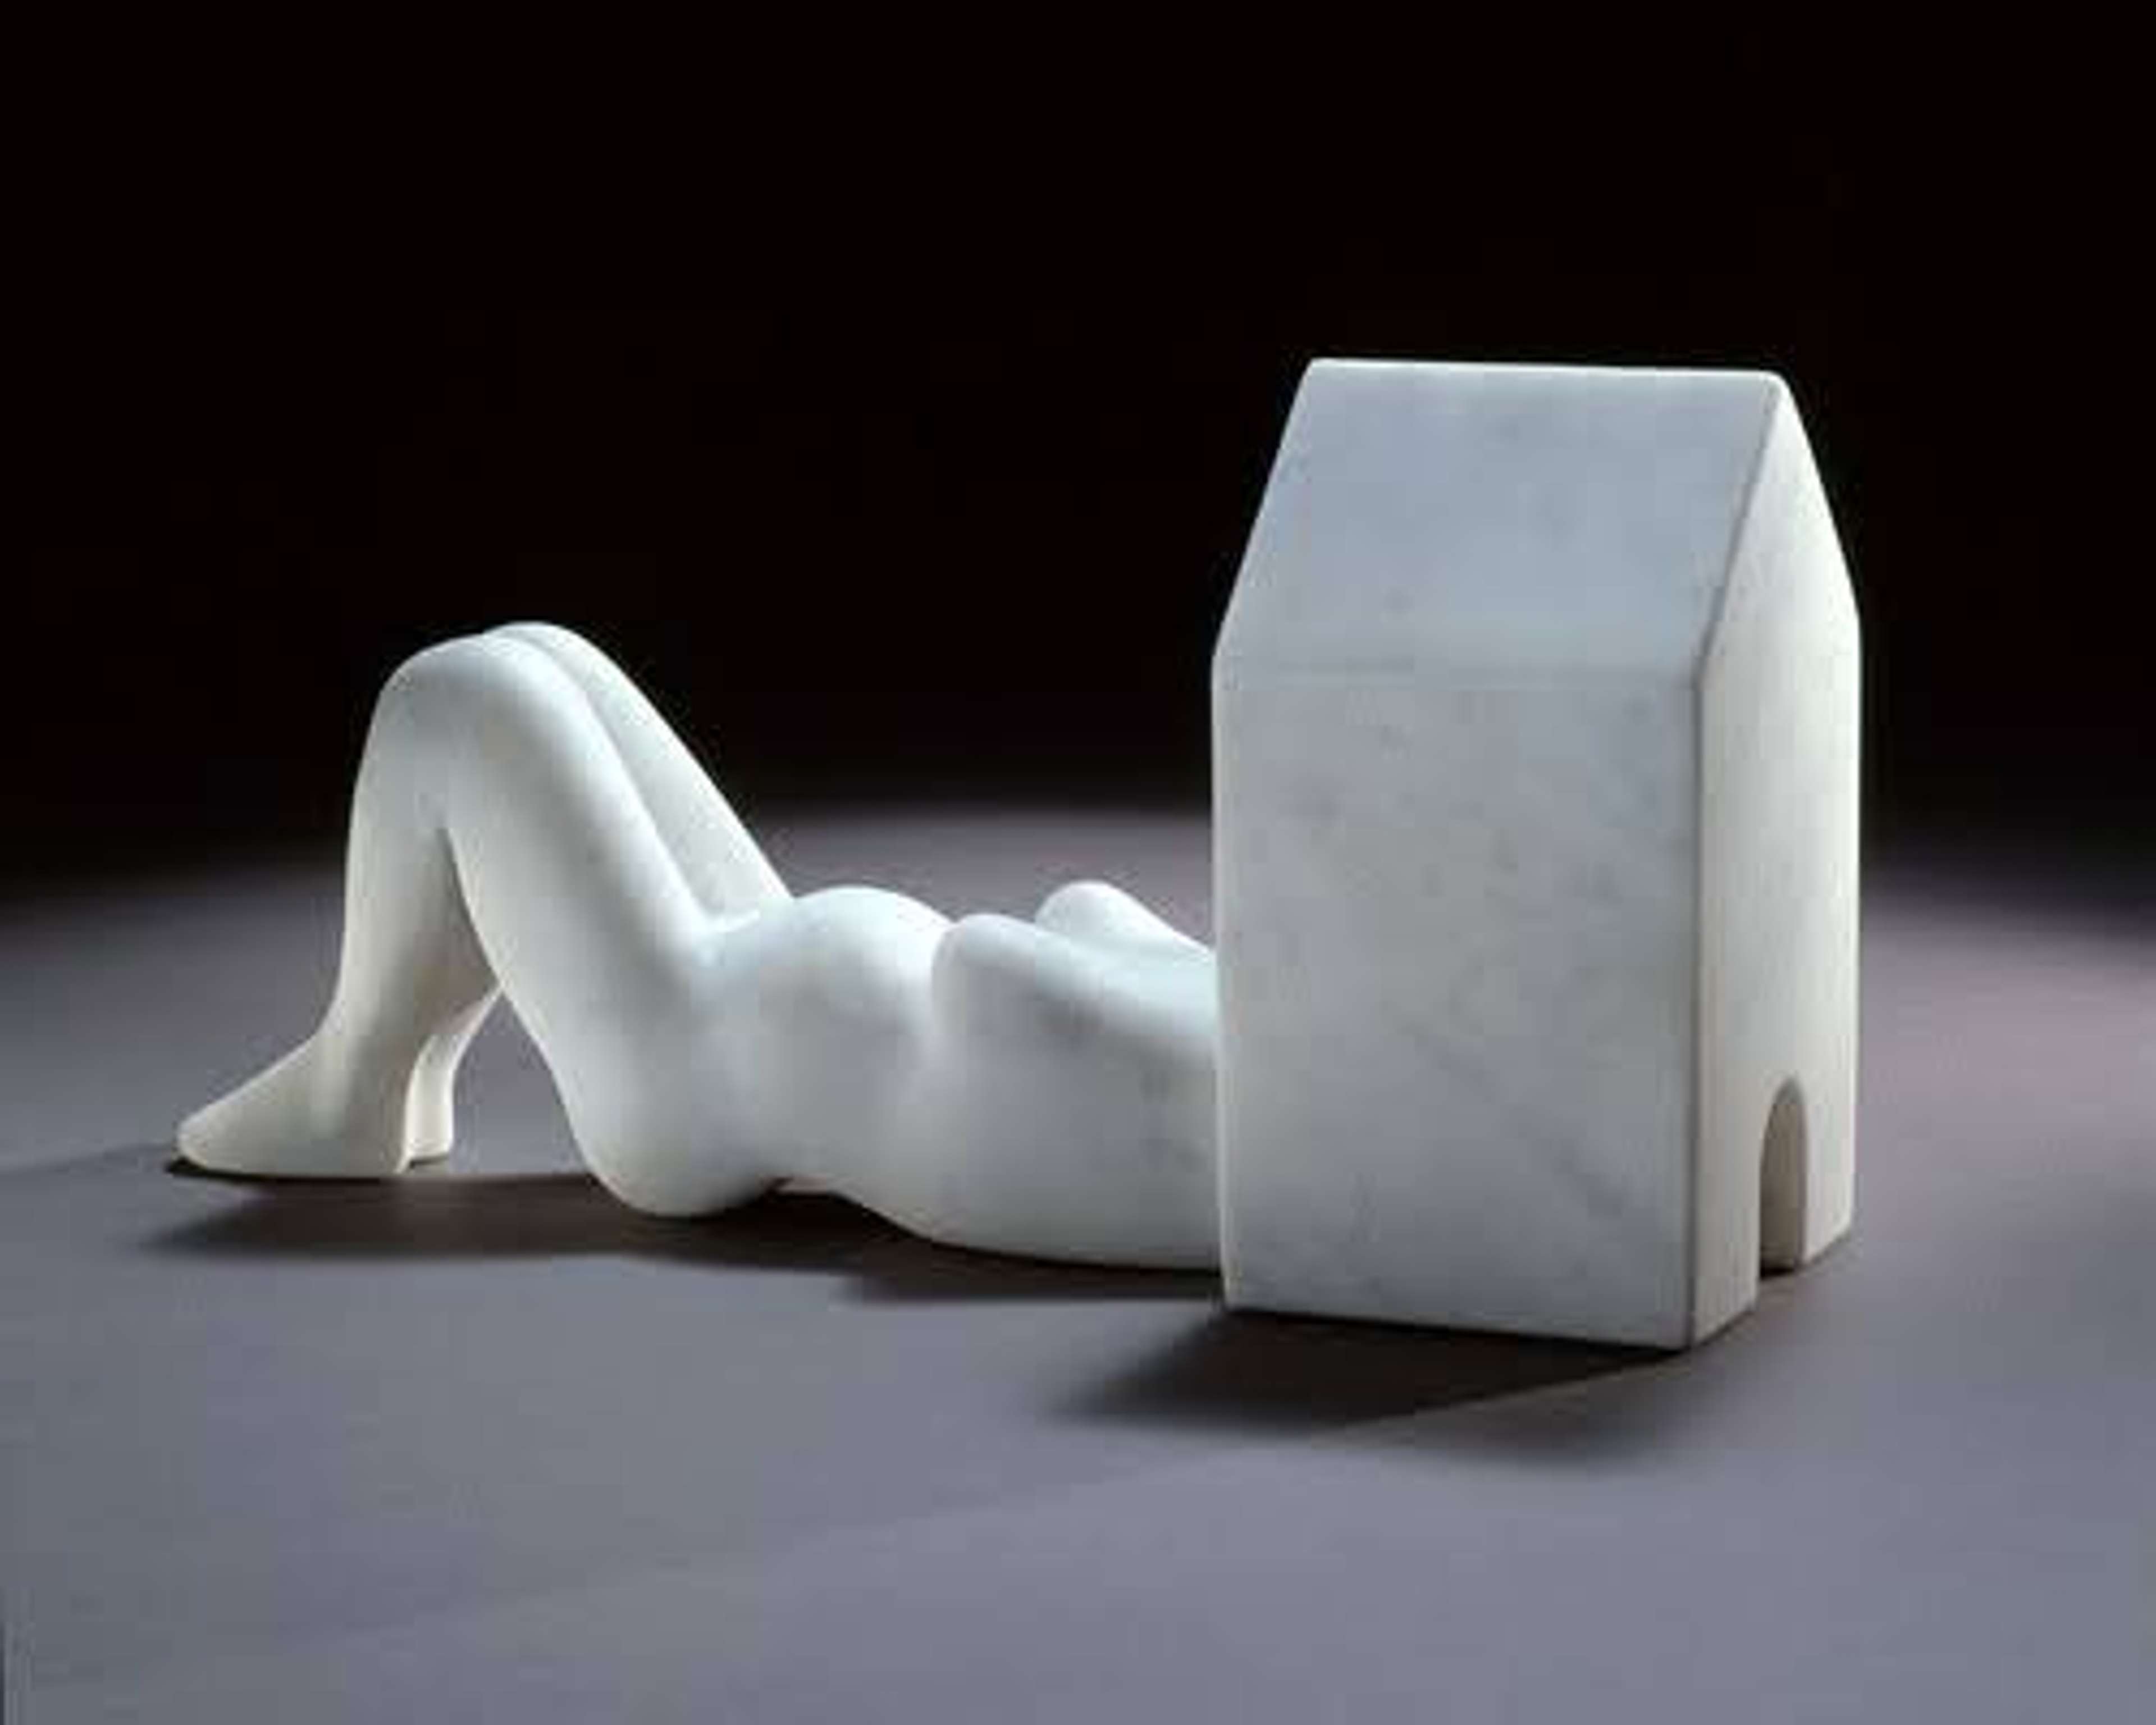 Louise Bourgeois’ Femme Maison.  A white marble sculpture of a pregnant woman lying down with her head inside of a home structure. 